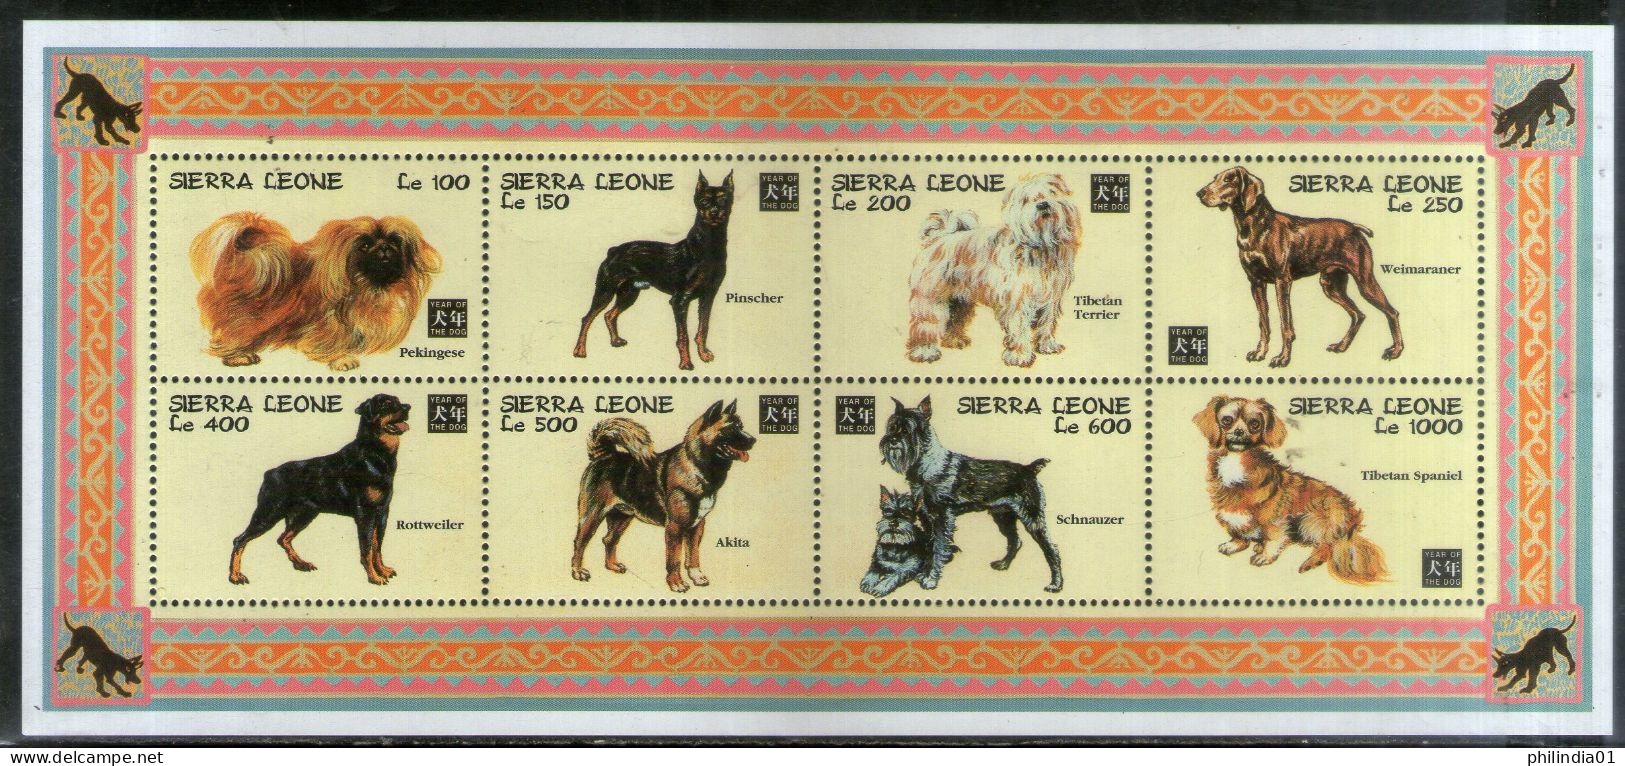 Sierra Leone 1994 Chinese New Year Dogs Animals Sc 1717 Sheetlet MNH # 6330 - Honden